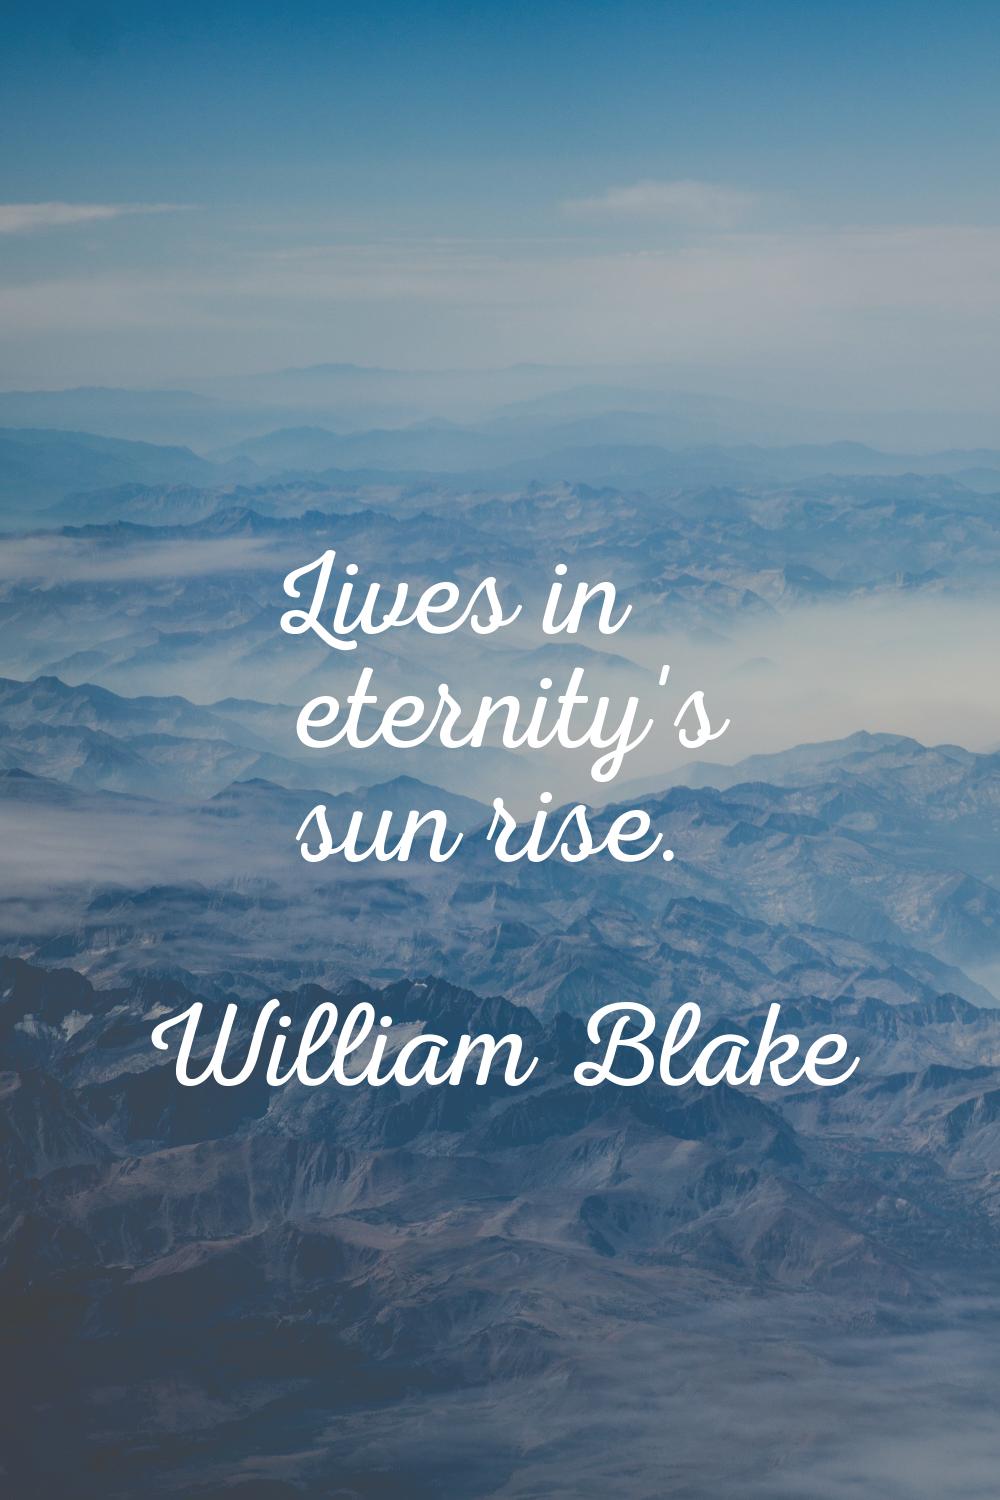 Lives in eternity's sun rise.